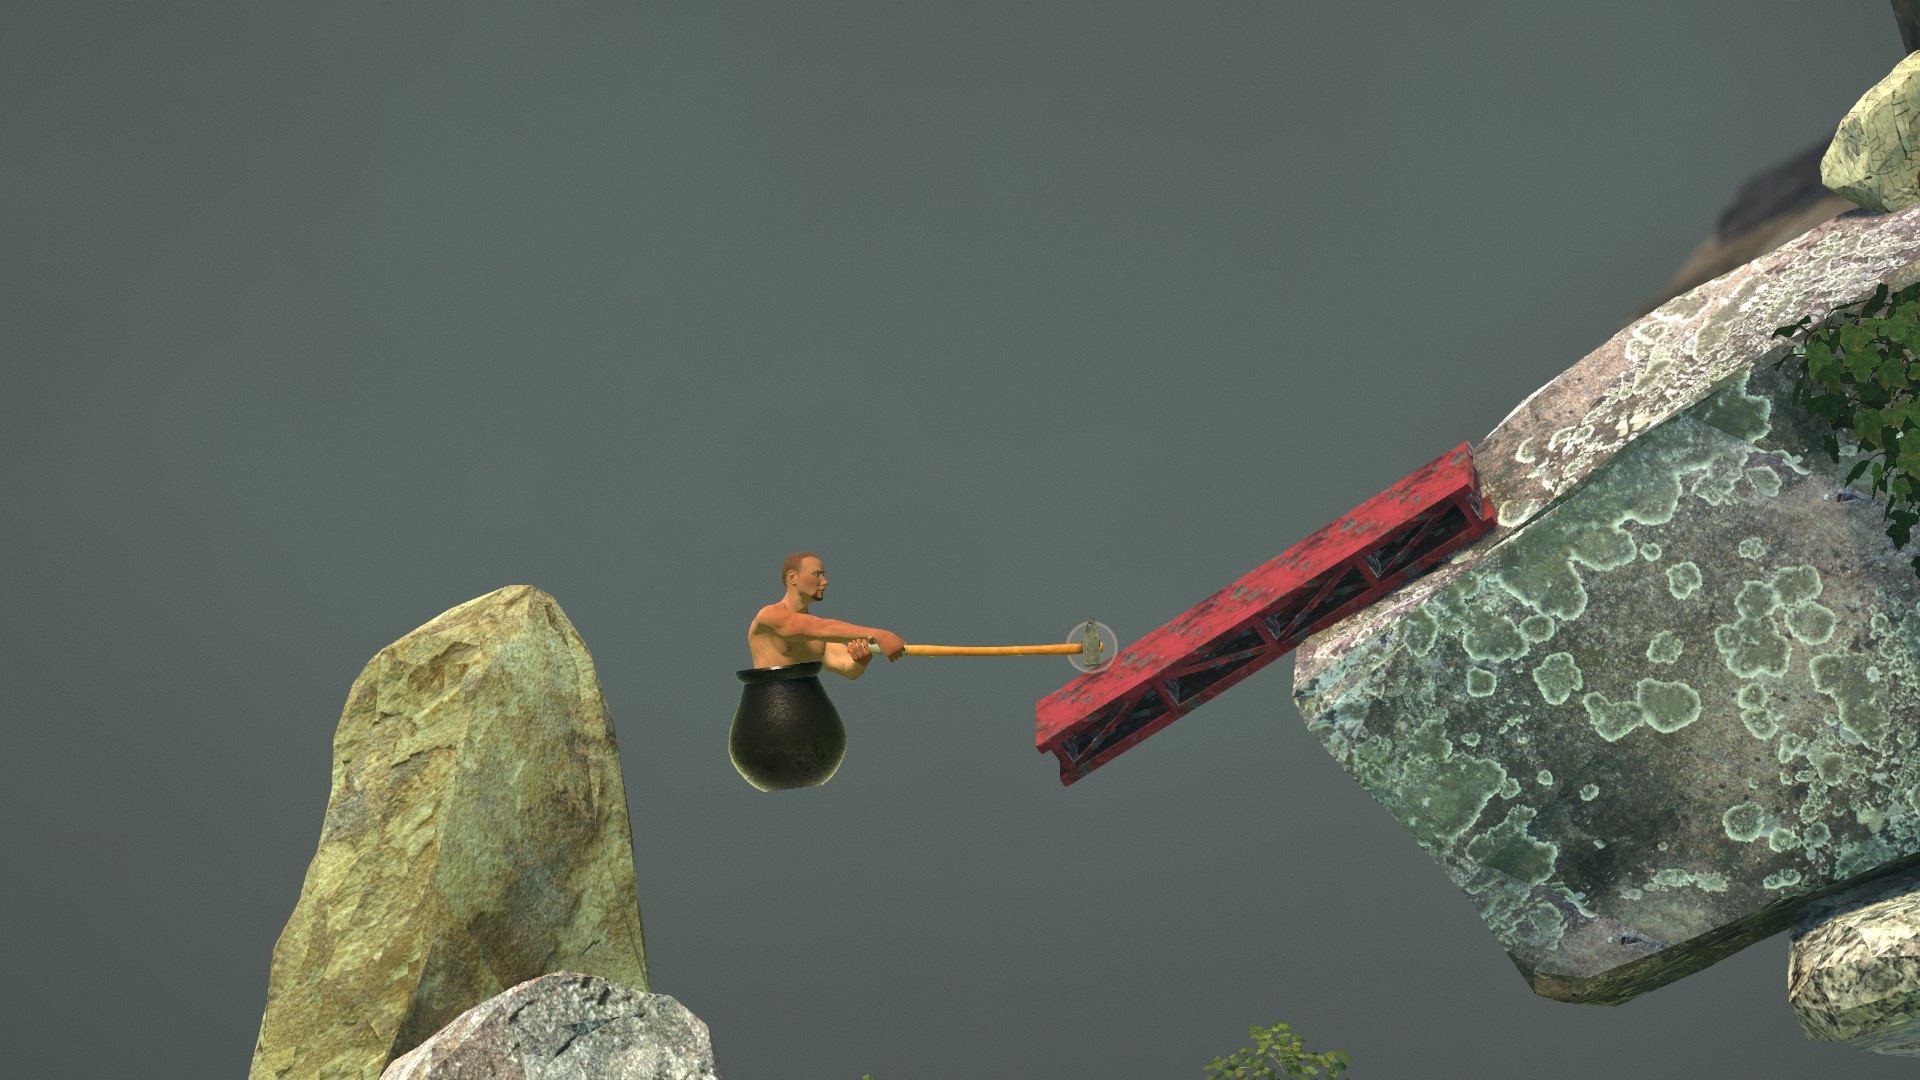 Getting Over It with Bennett Foddy Soundtrack